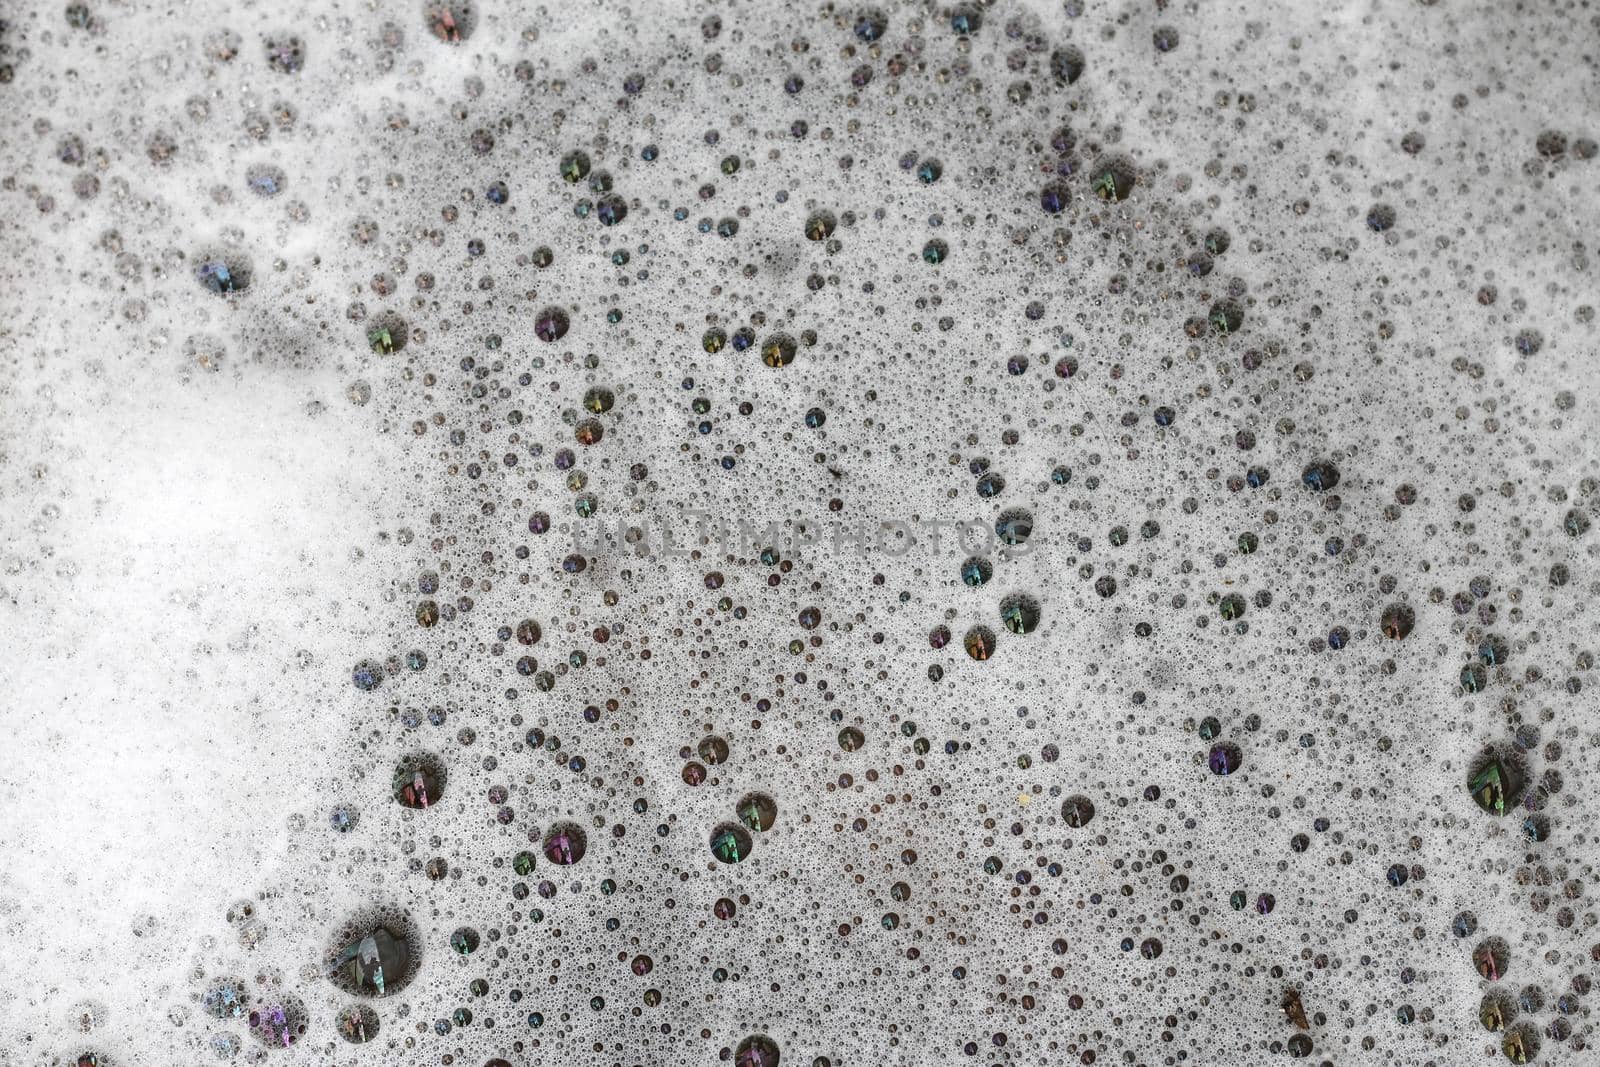 Detergent bubbles float in the waste water.